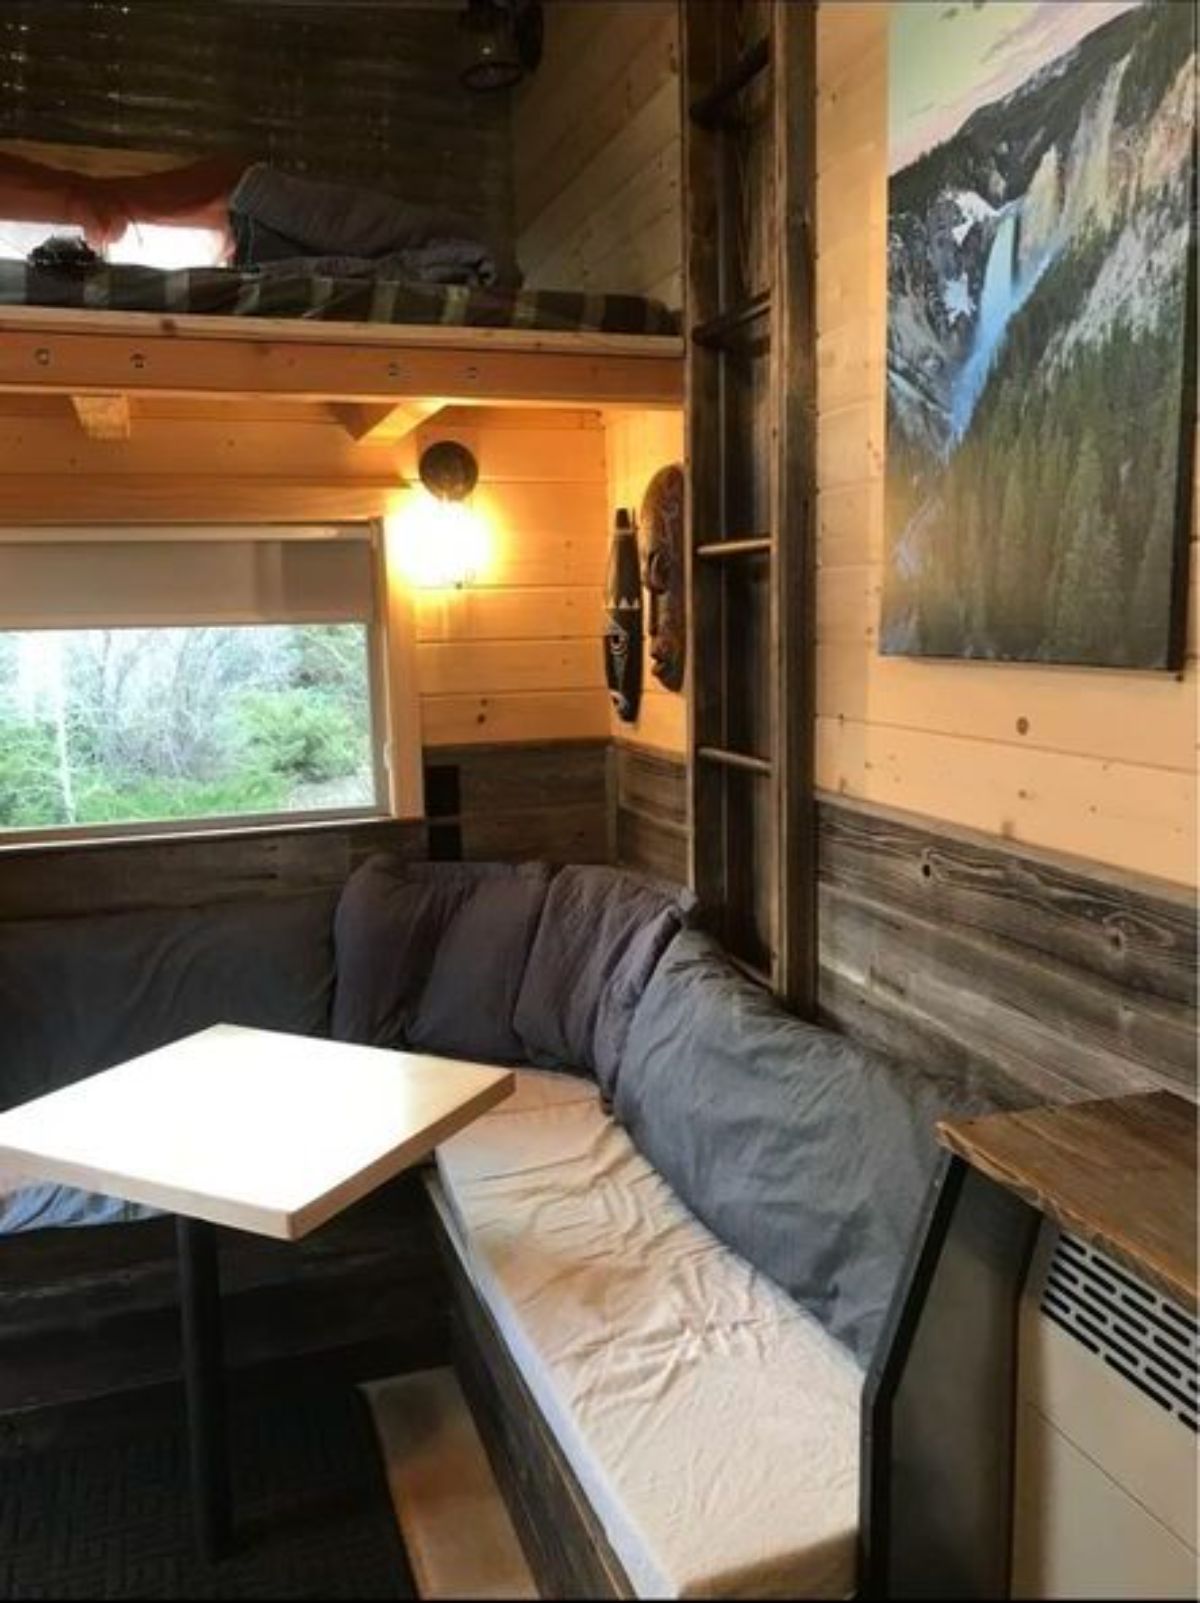 The living area of 24’ Rustic Tiny House On Wheels has an L shaped couch, removing table, wall mounted book shelf and a loft which can be used as extra sleeping space